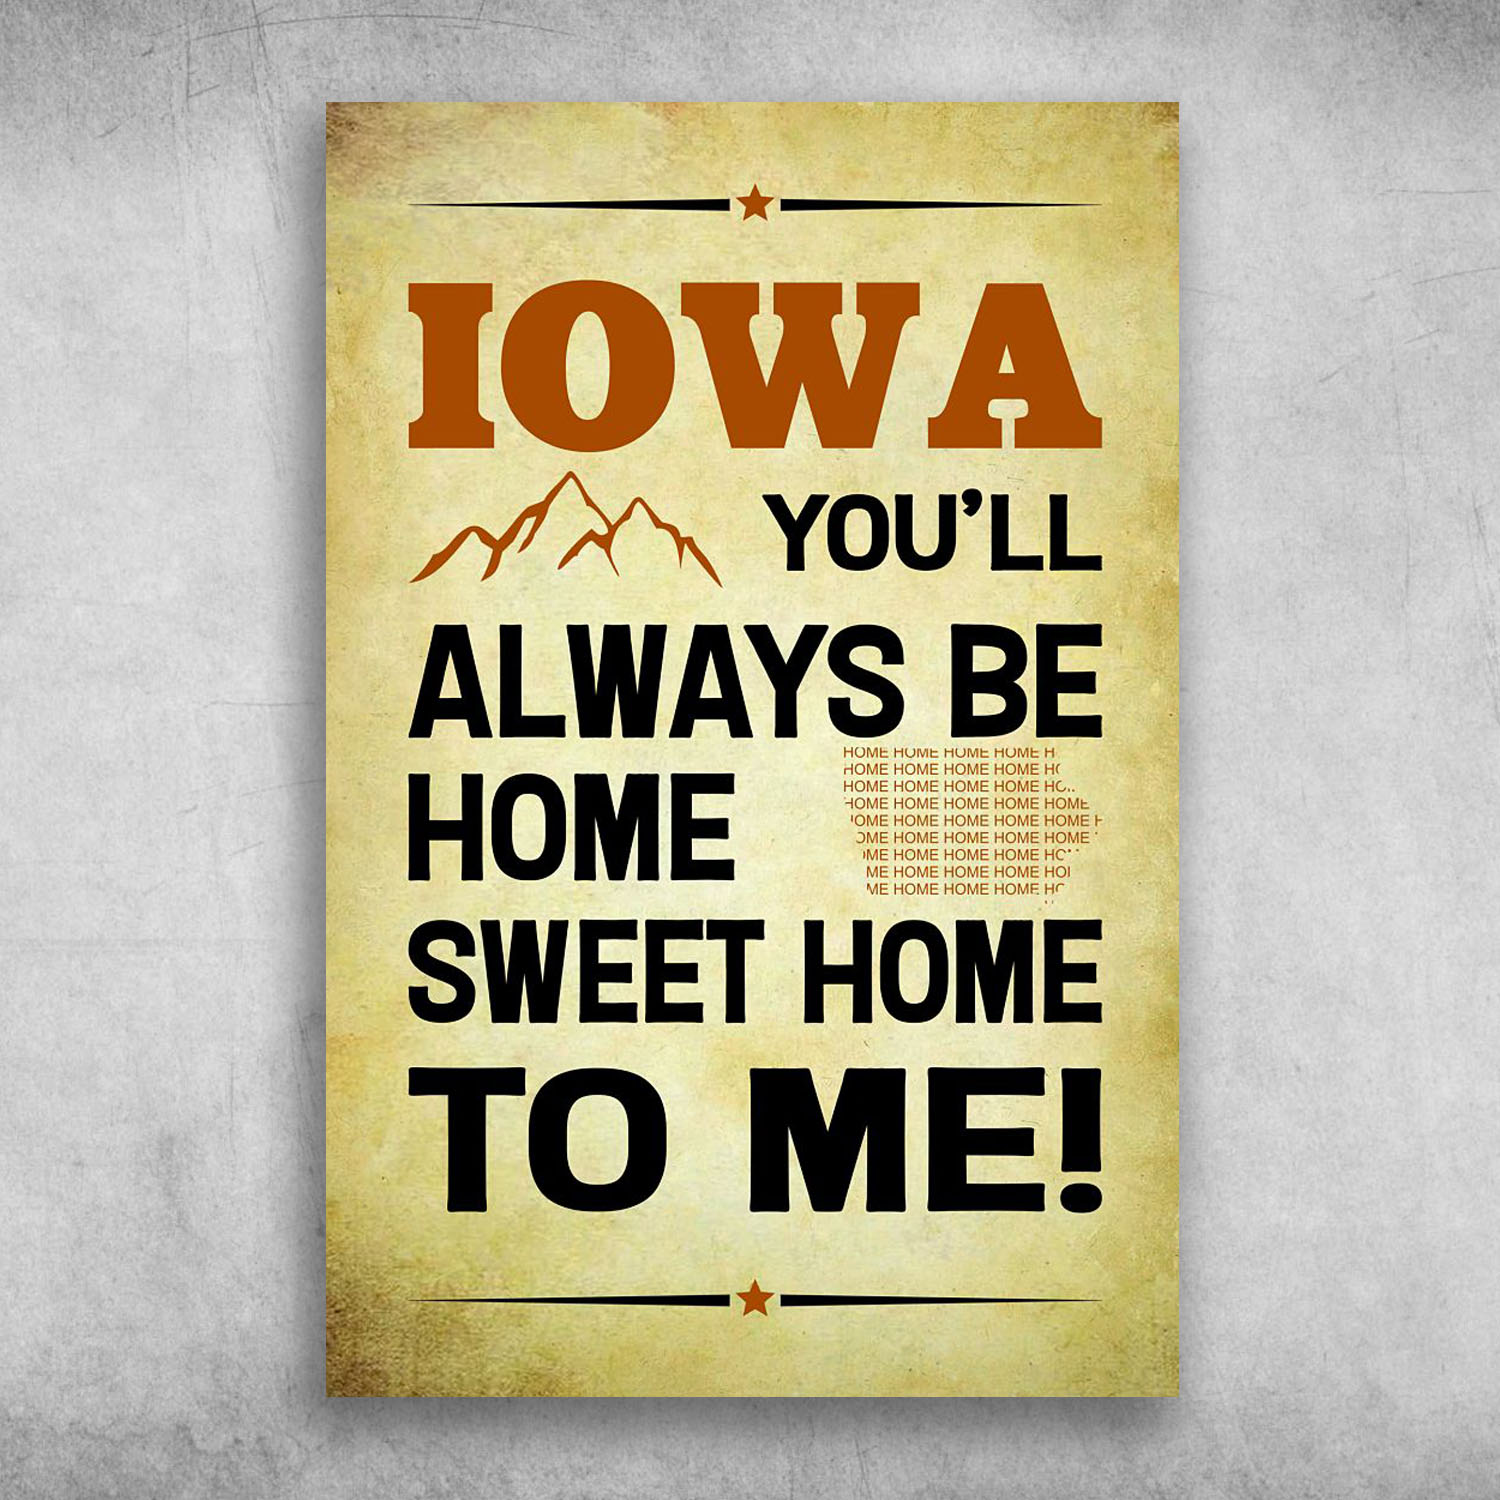 Iowa You'll Always Be Home Sweet Home To Me